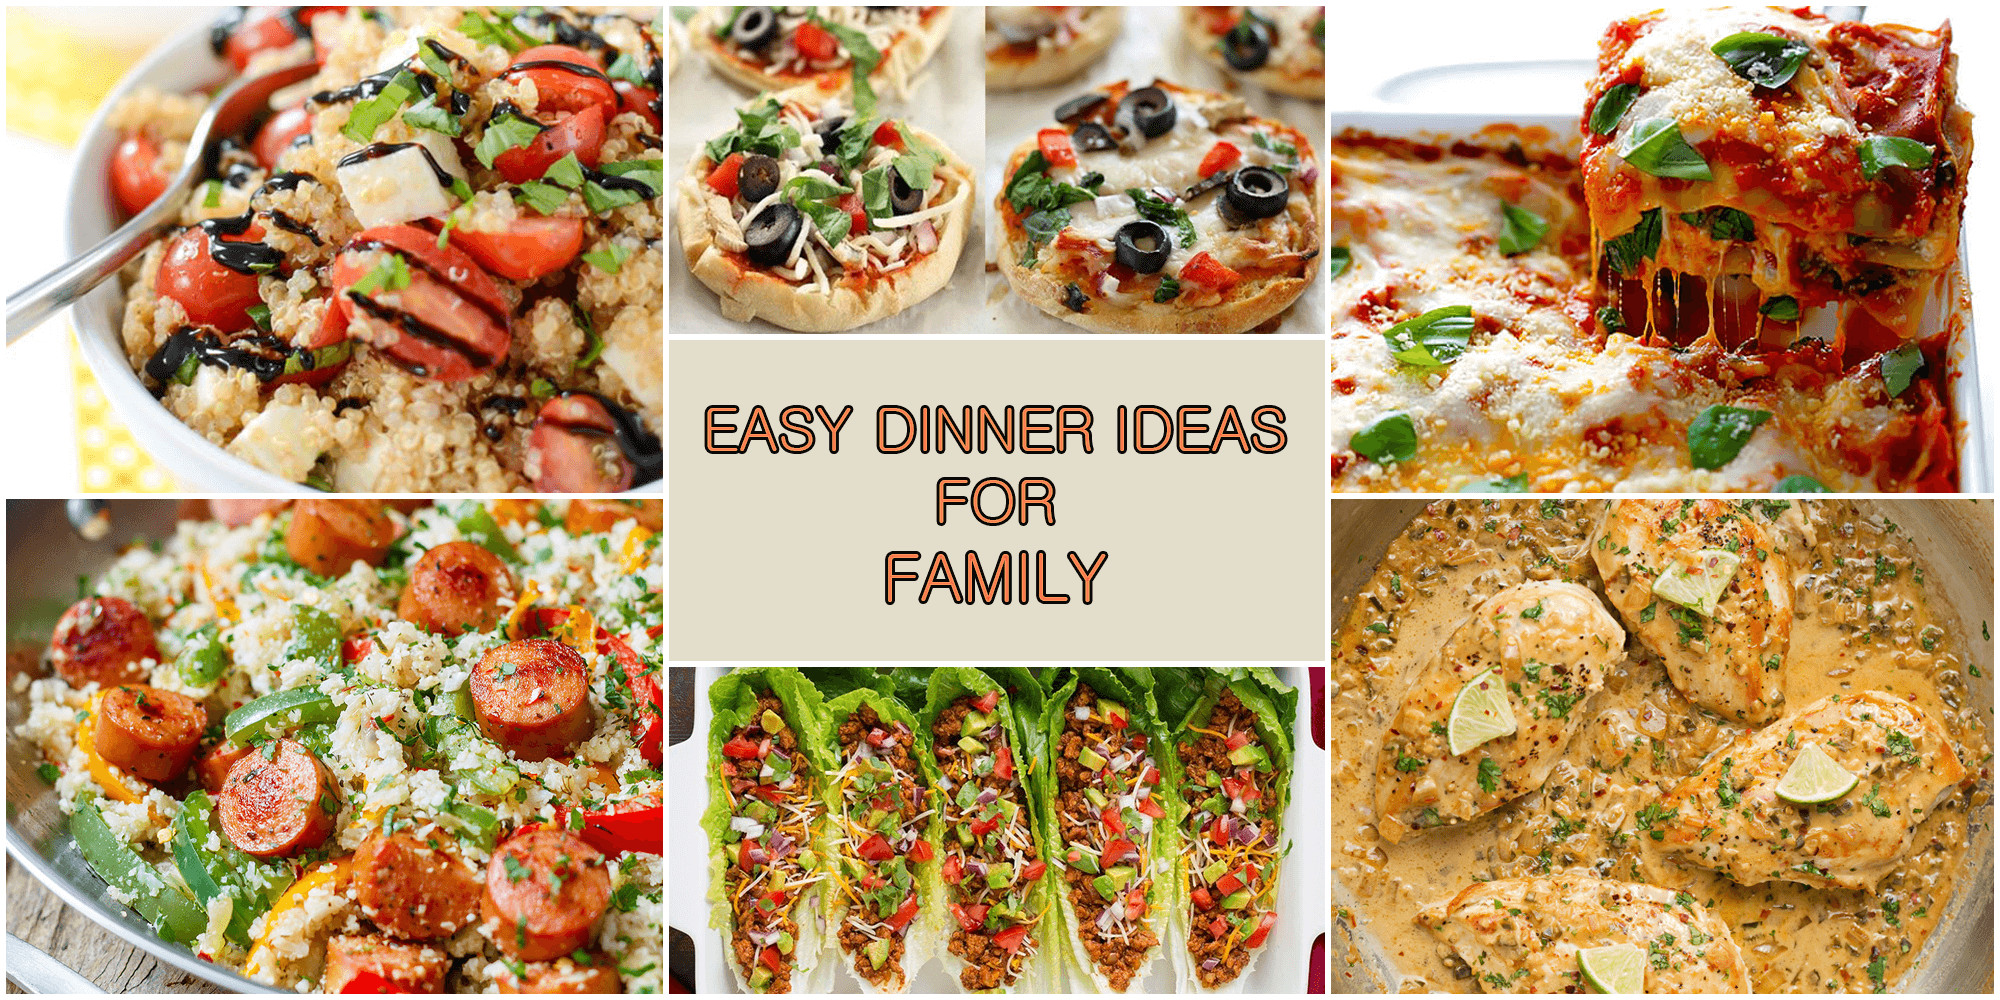 Easy Healthy Dinner Recipes For Family
 Healthy and Easy Dinner Ideas For Family